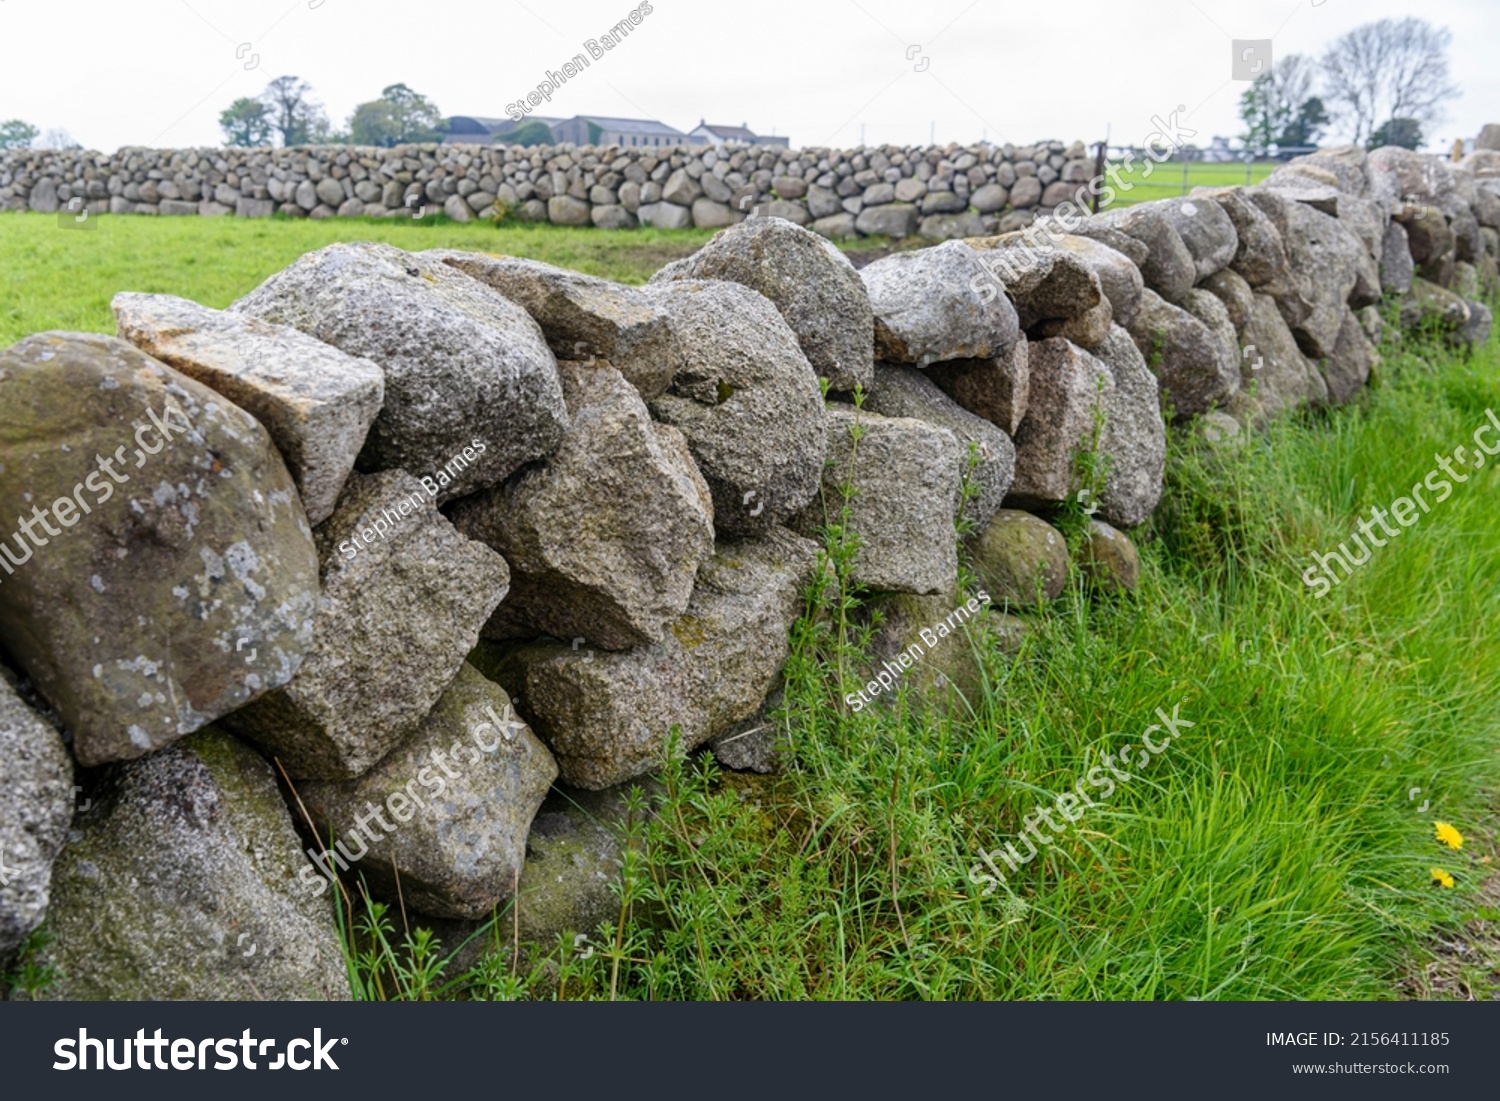 Traditional dry stone walls, common around the Mourne Mountains, Northern Ireland. #2156411185